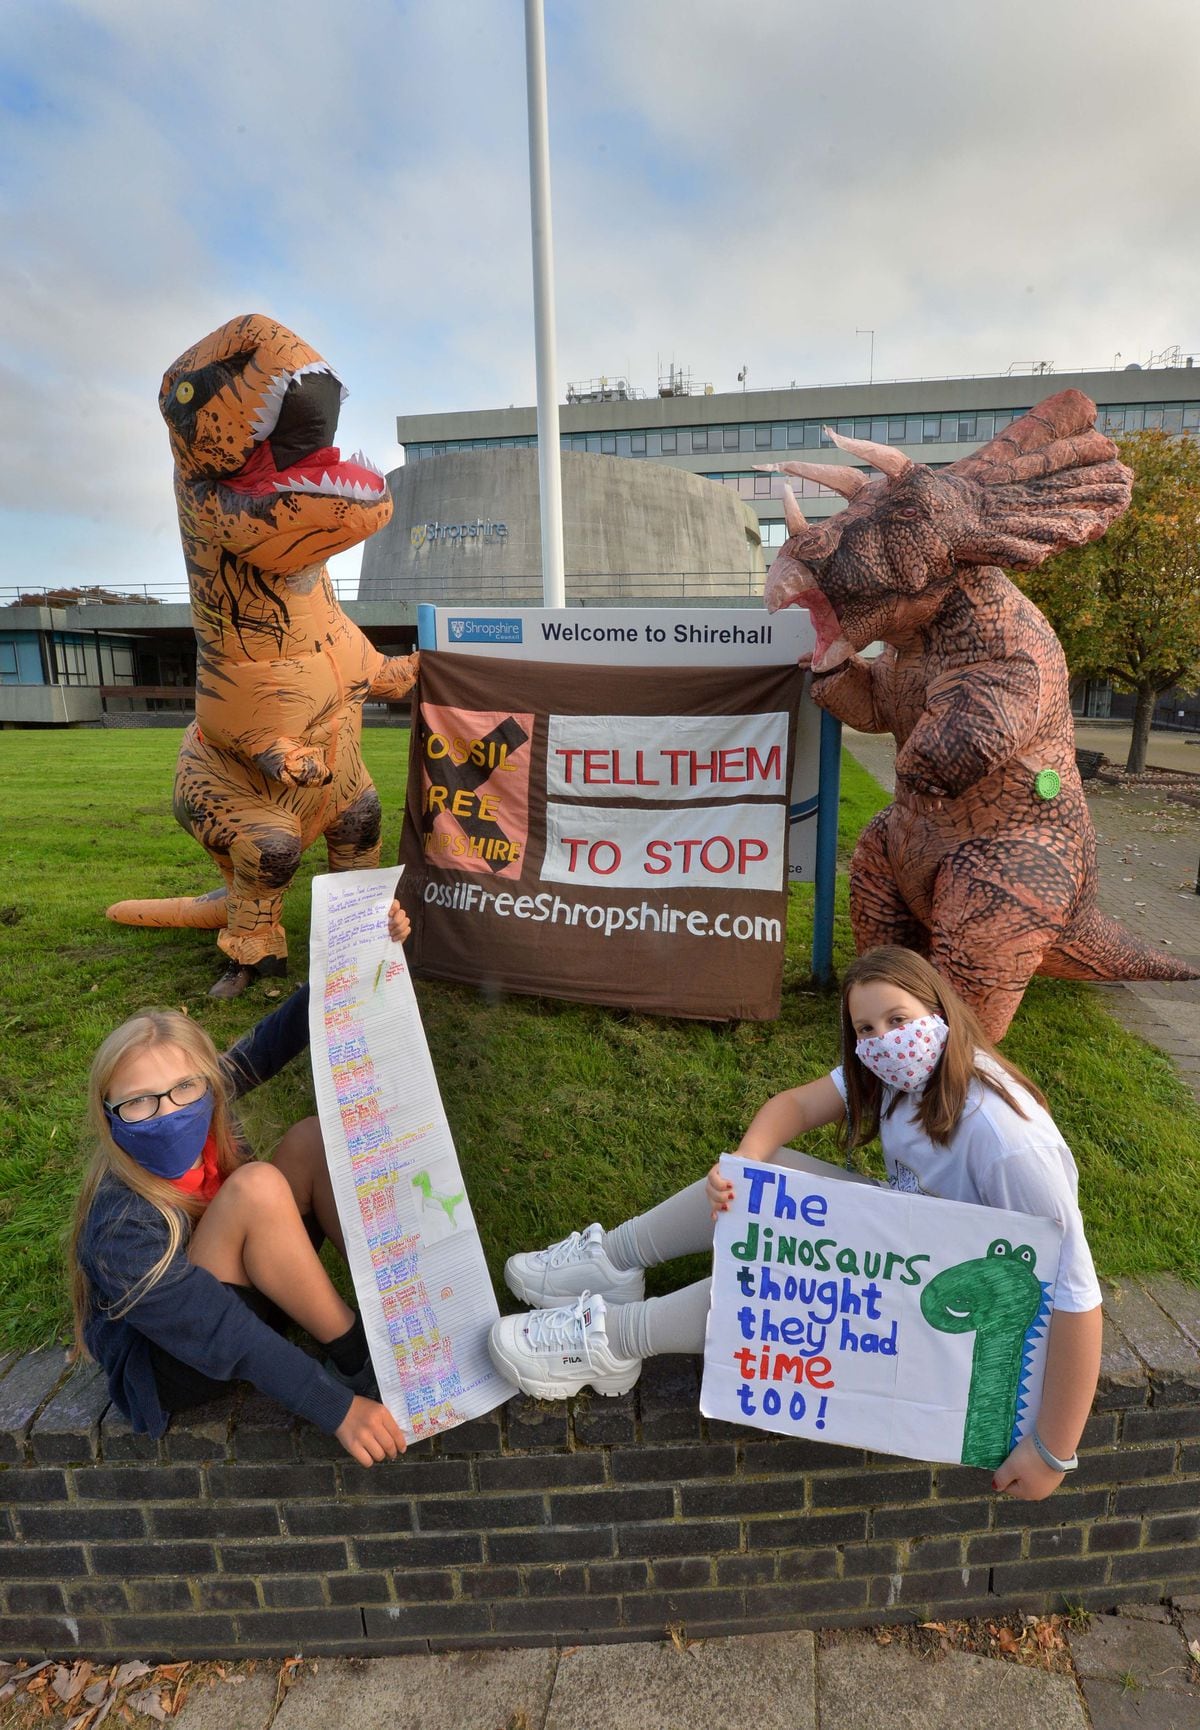 Youngsters Alice Russell 9, and Ana Russell 9, were joined by dinosaurs to hand in a petition asking the council to think about their investments into fossil fuel companies.